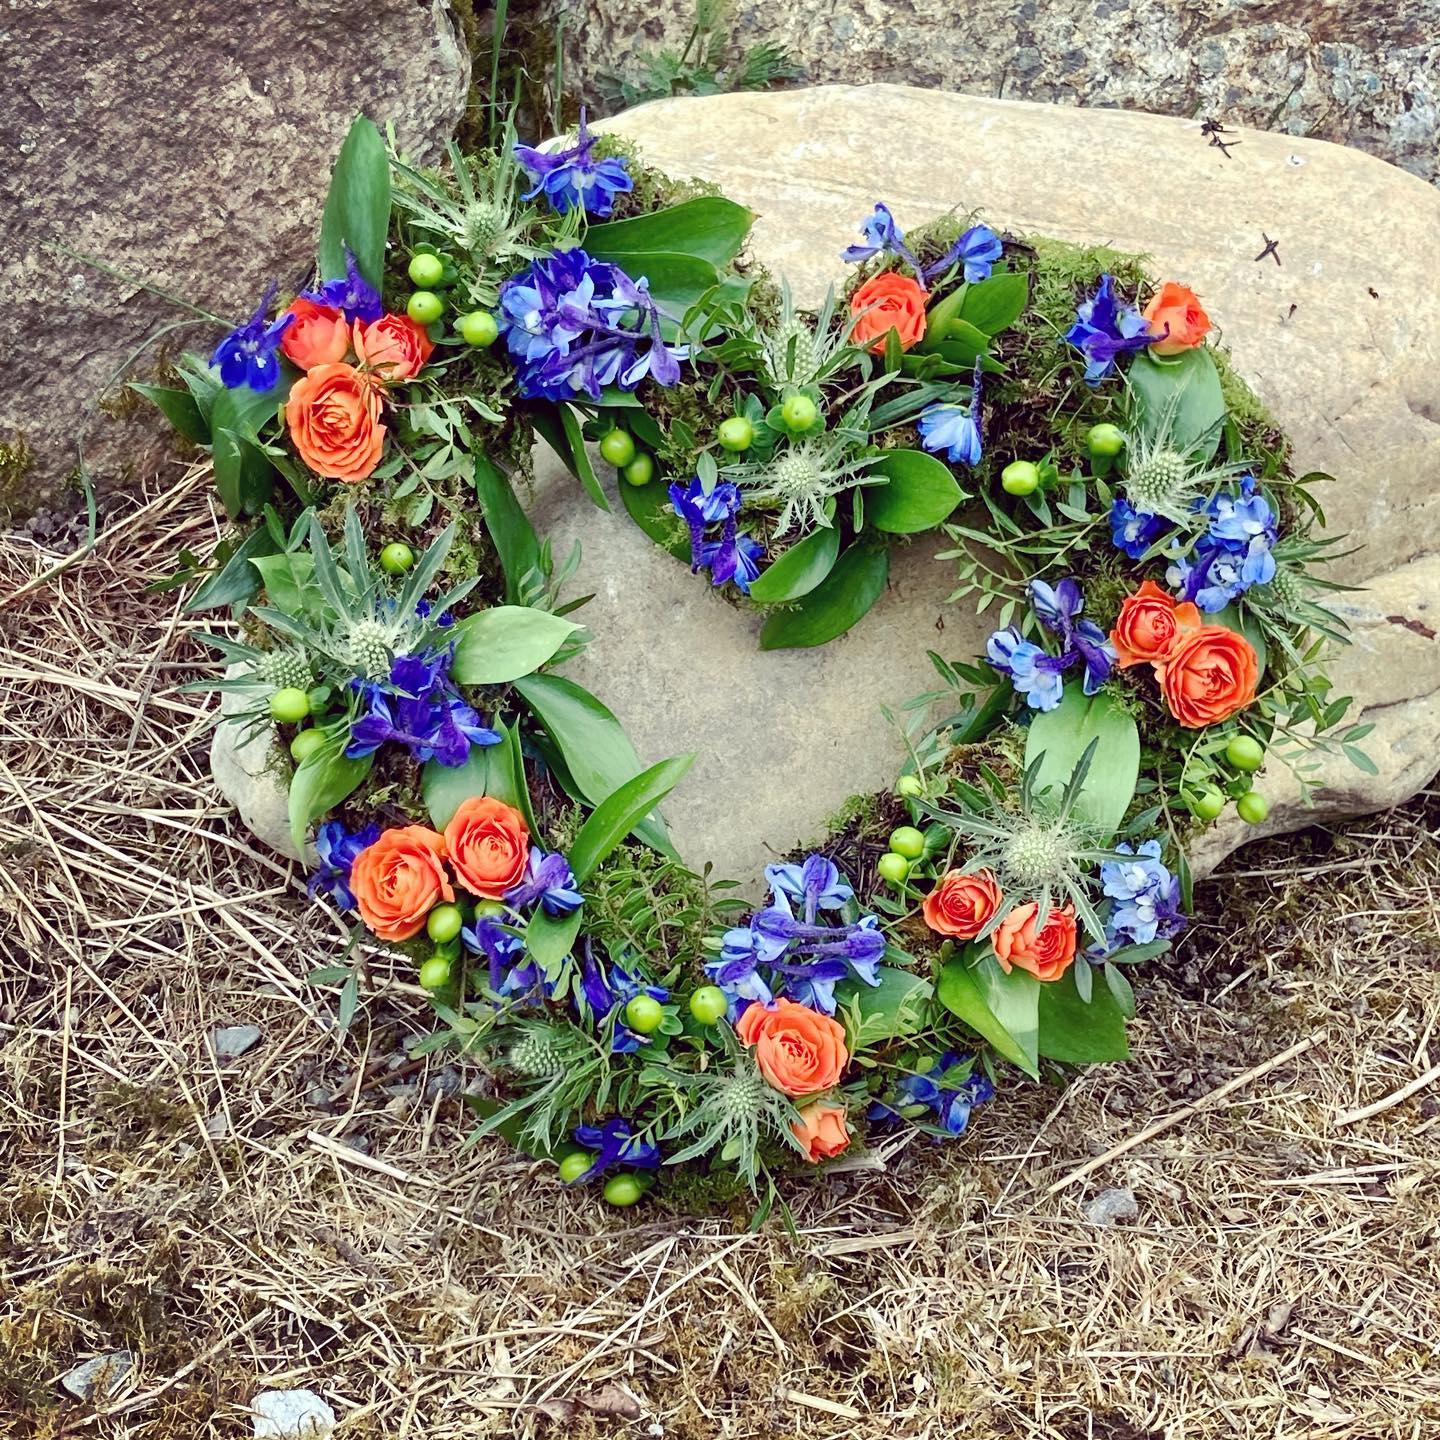 Funeral Heart Wreath created by  Rachel's Country flowers who is a specialist funeral florist situated in the Scottish Highlands. Covering Edderton, Tain, Seaboard Villages, Balintore, Hilton, Fearn, Portmahomack, Invergordon, Alness, Dornoch, Golspie, Ardgay, Lairg. Lettering casket sprays, sheafs, posies and wreaths